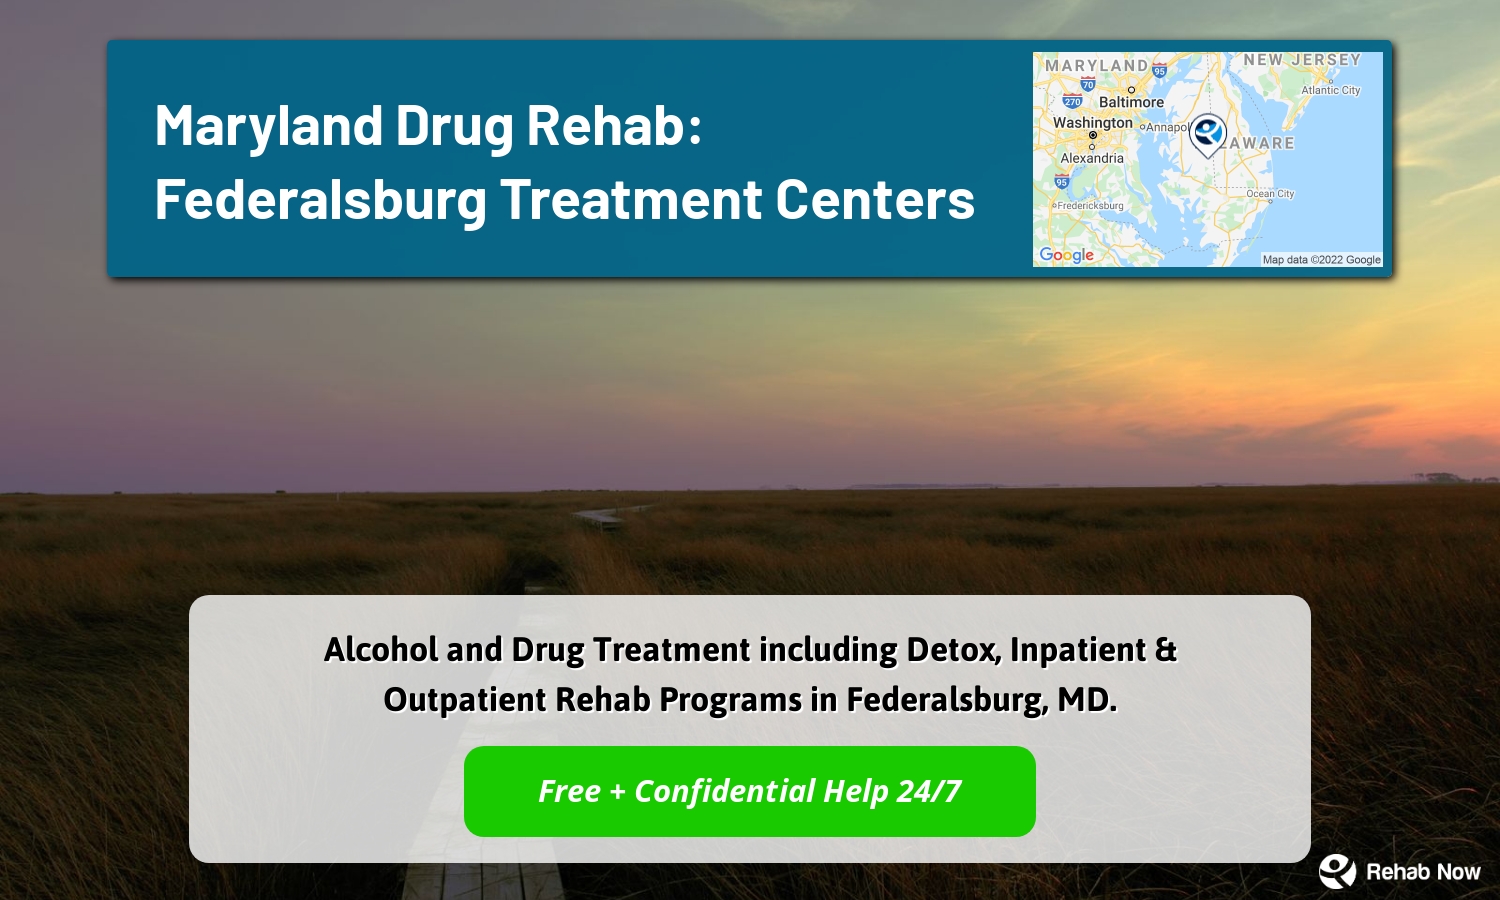 Alcohol and Drug Treatment including Detox, Inpatient & Outpatient Rehab Programs in Federalsburg, MD.